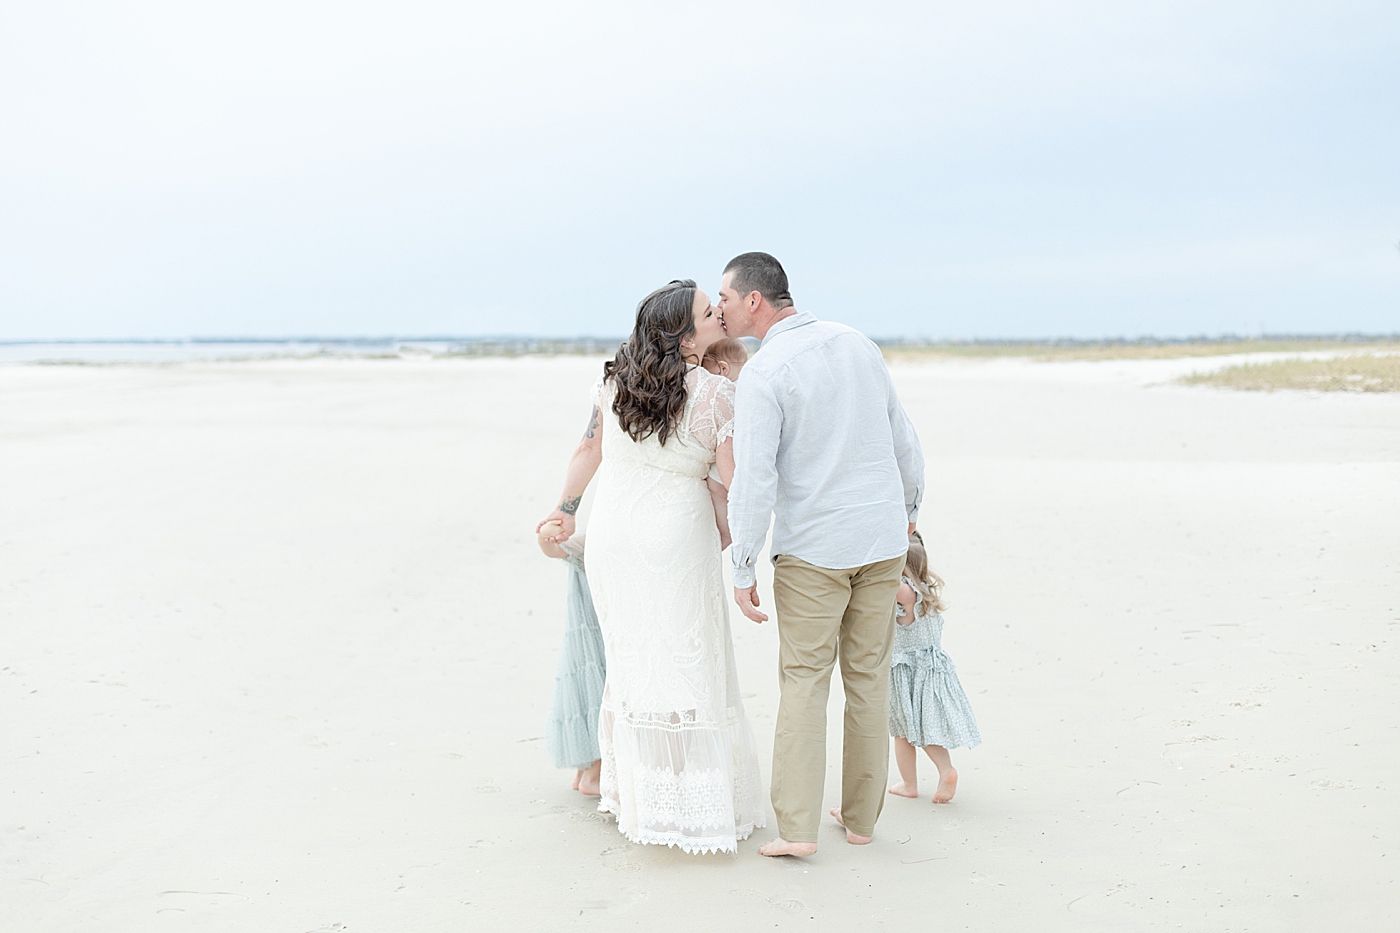 Mom and dad kiss while walking on the beach | Photo by Little Sunshine Photography